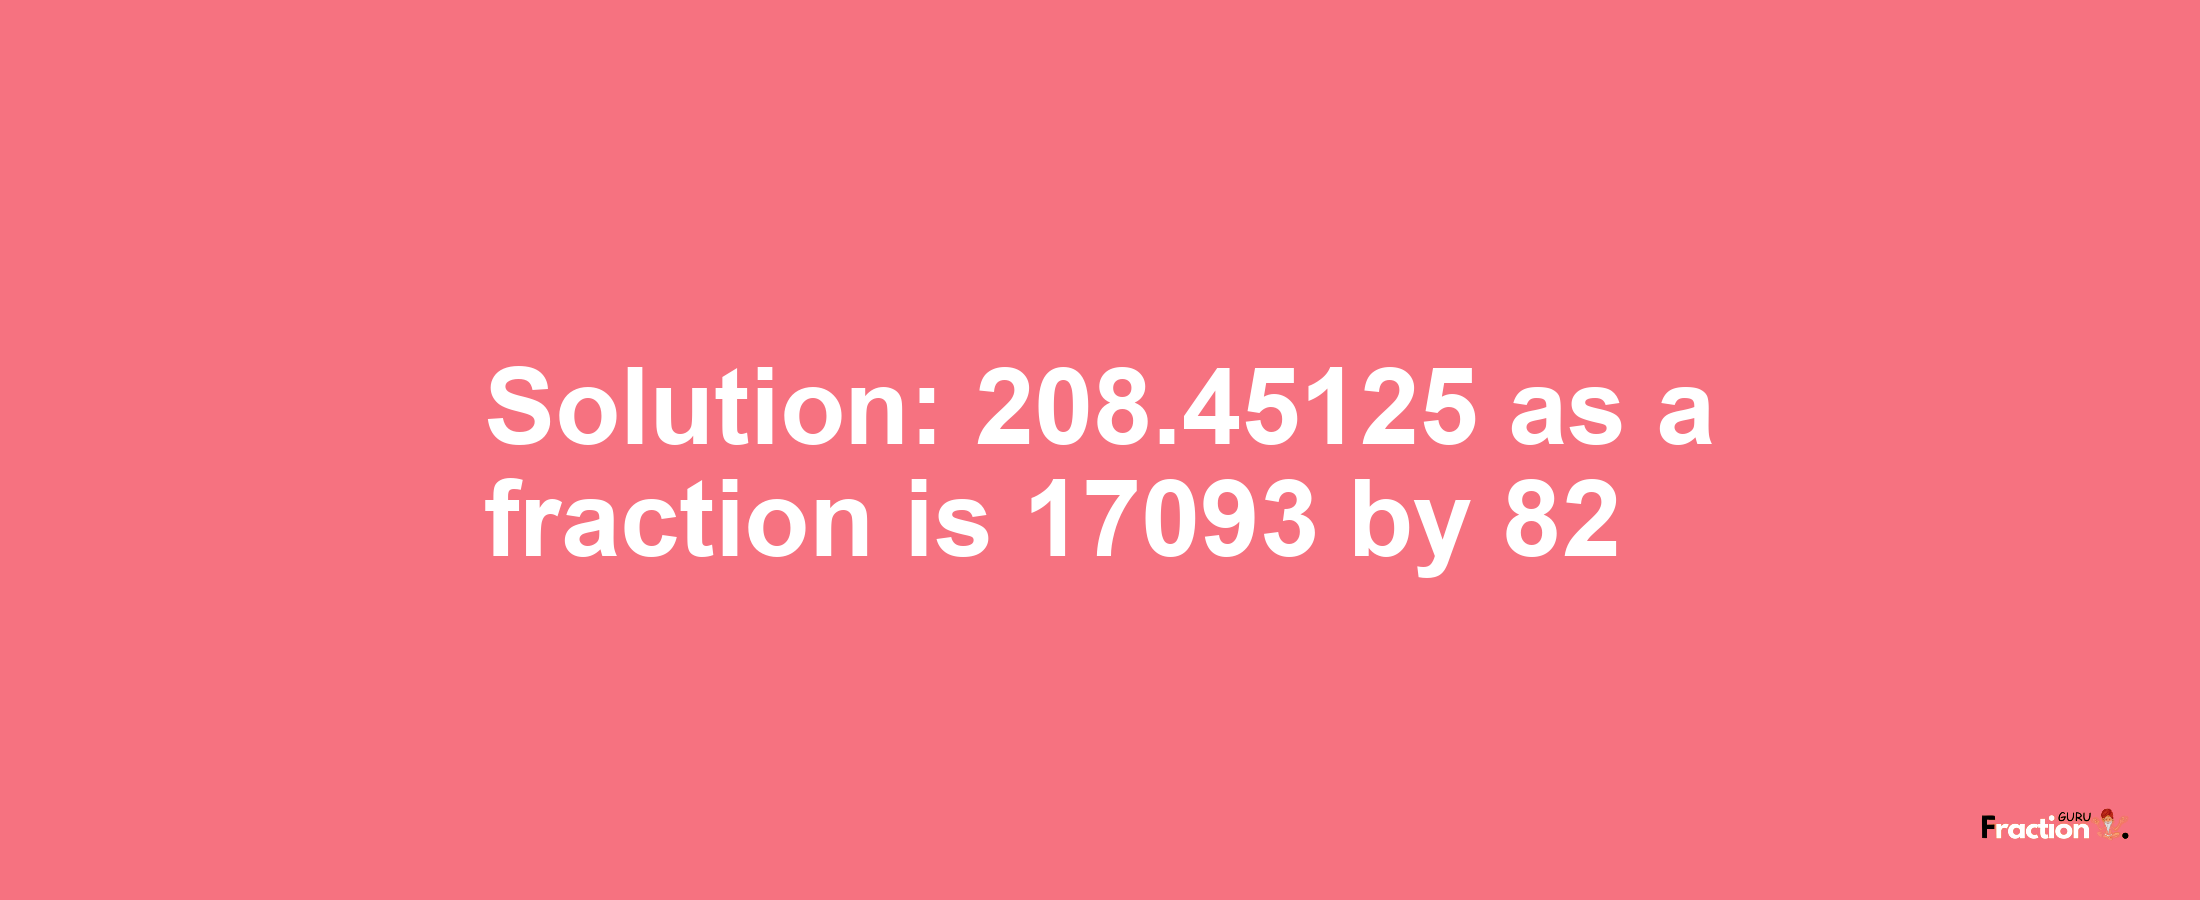 Solution:208.45125 as a fraction is 17093/82